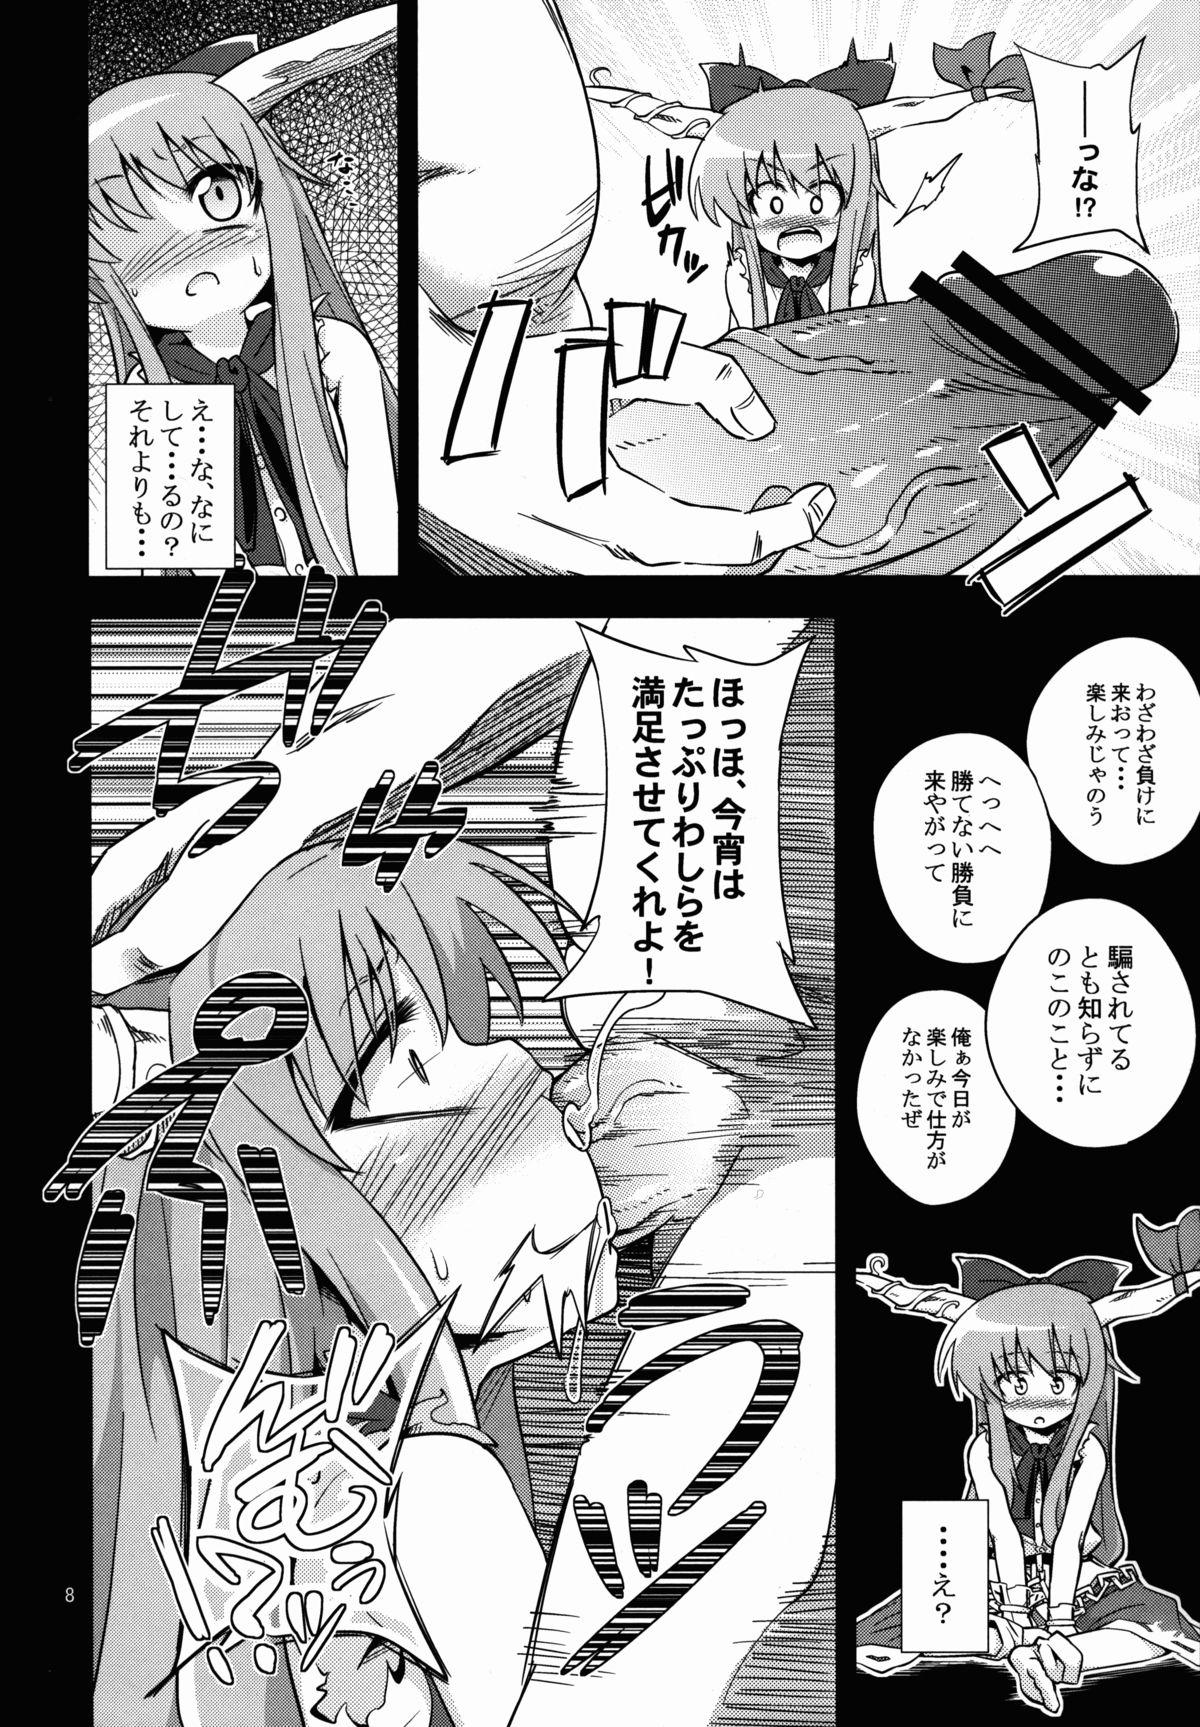 Mmf 鬼犯嘘犯喜 - Touhou project Clitoris - Page 8